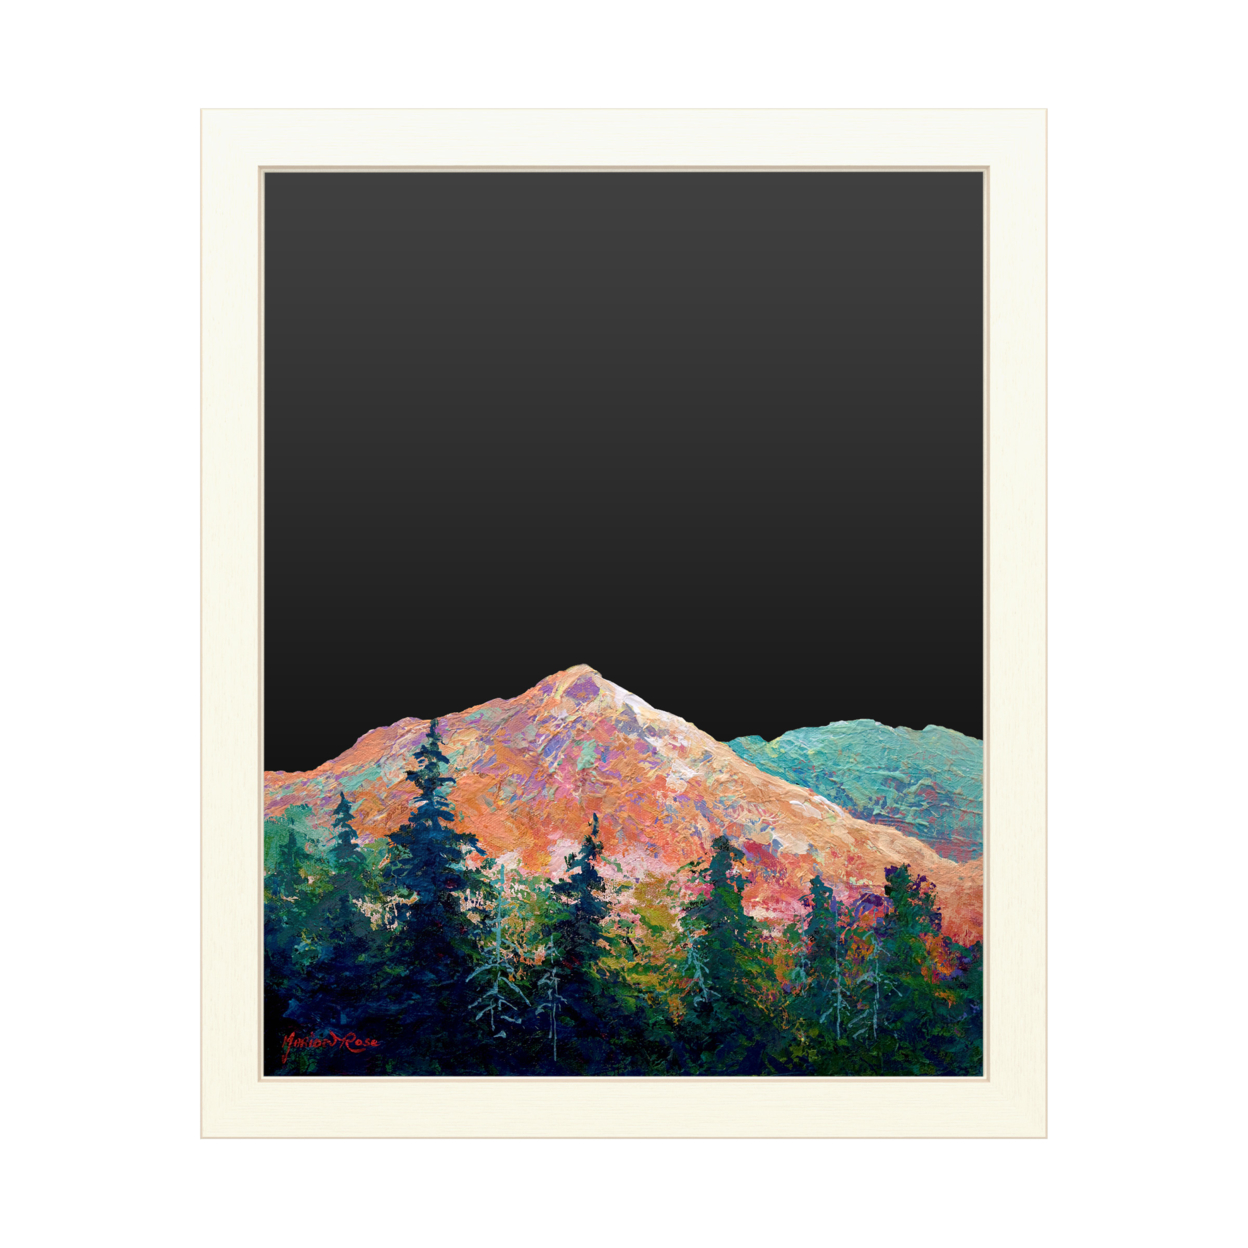 16 X 20 Chalk Board With Printed Artwork - Marion Rose Mtn Sentinel White Board - Ready To Hang Chalkboard